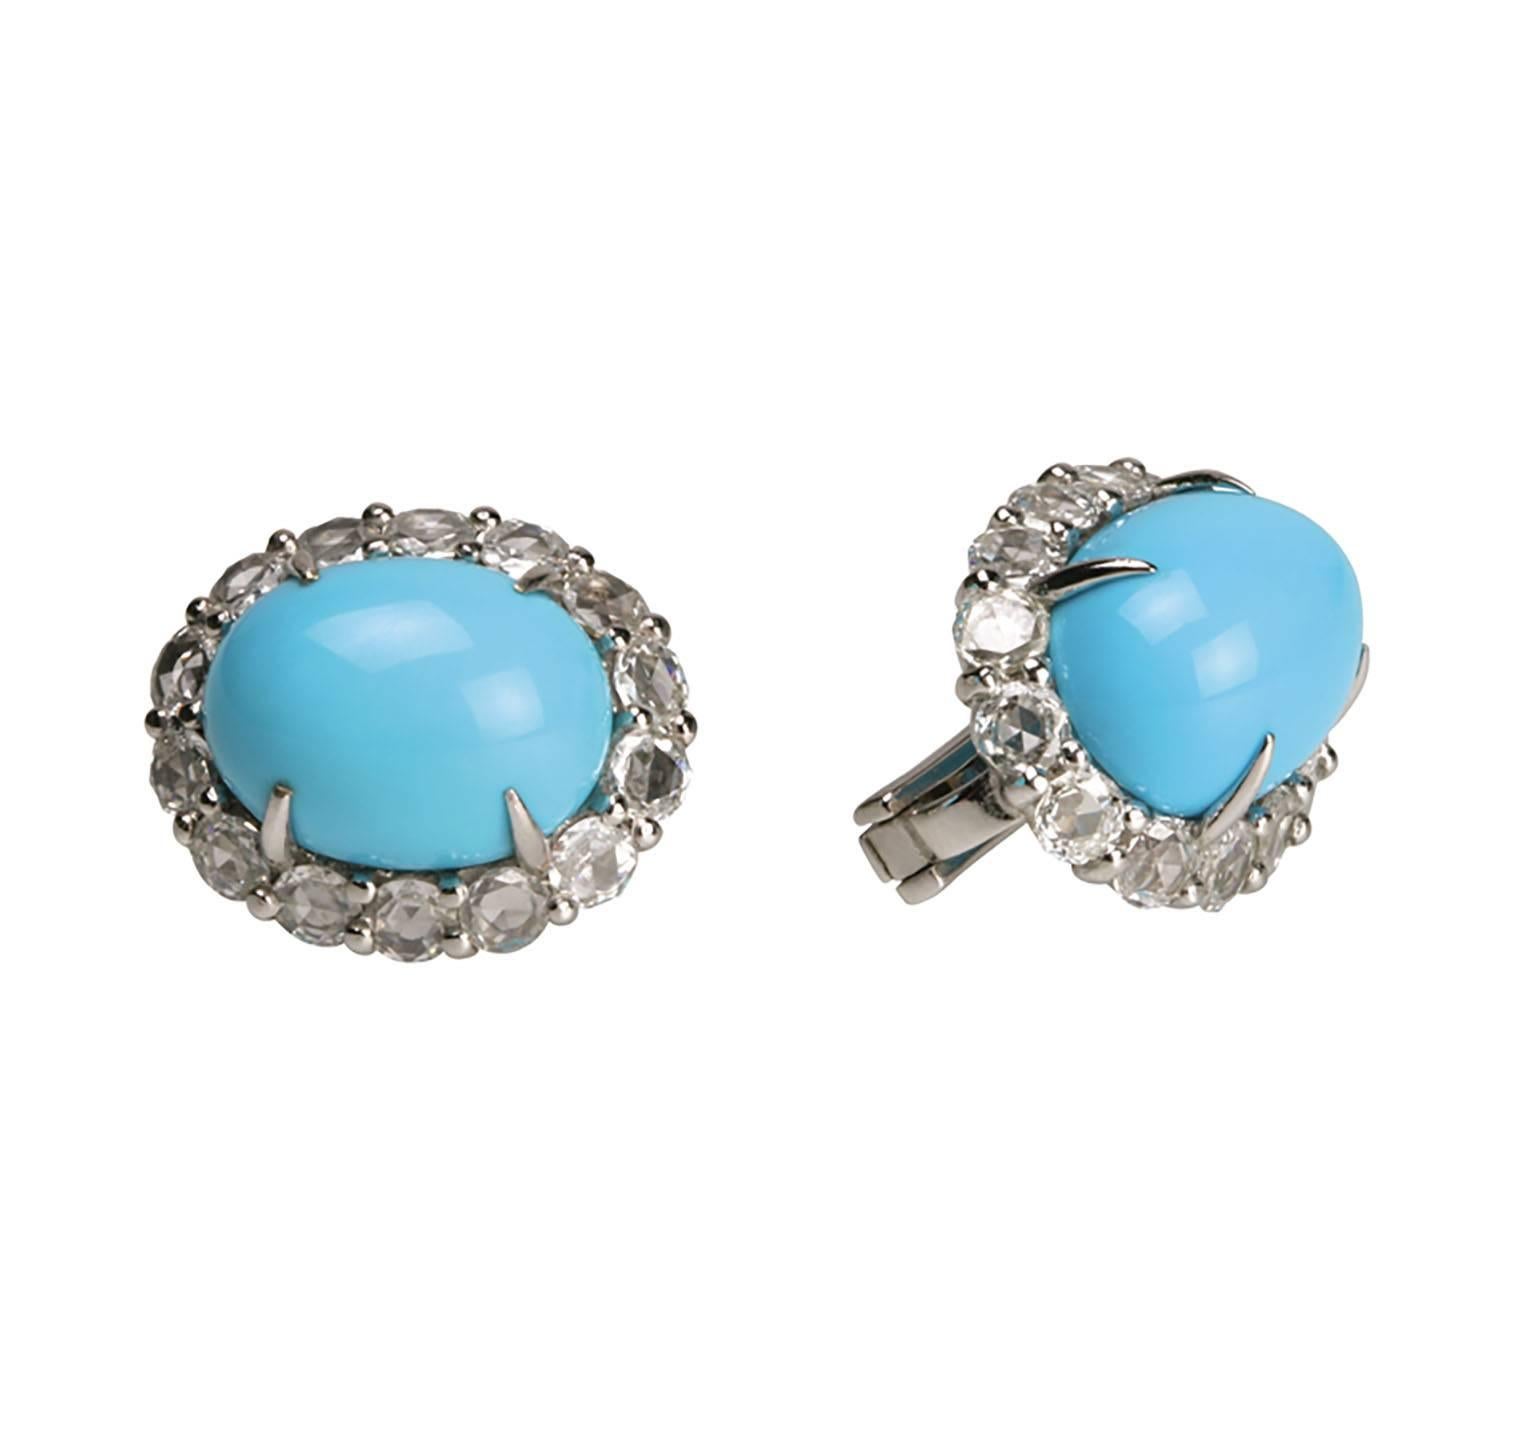 Modern Youmna Fine Jewellery 18K White Gold, Turquoise, Diamonds Ring & Earrings Suite For Sale